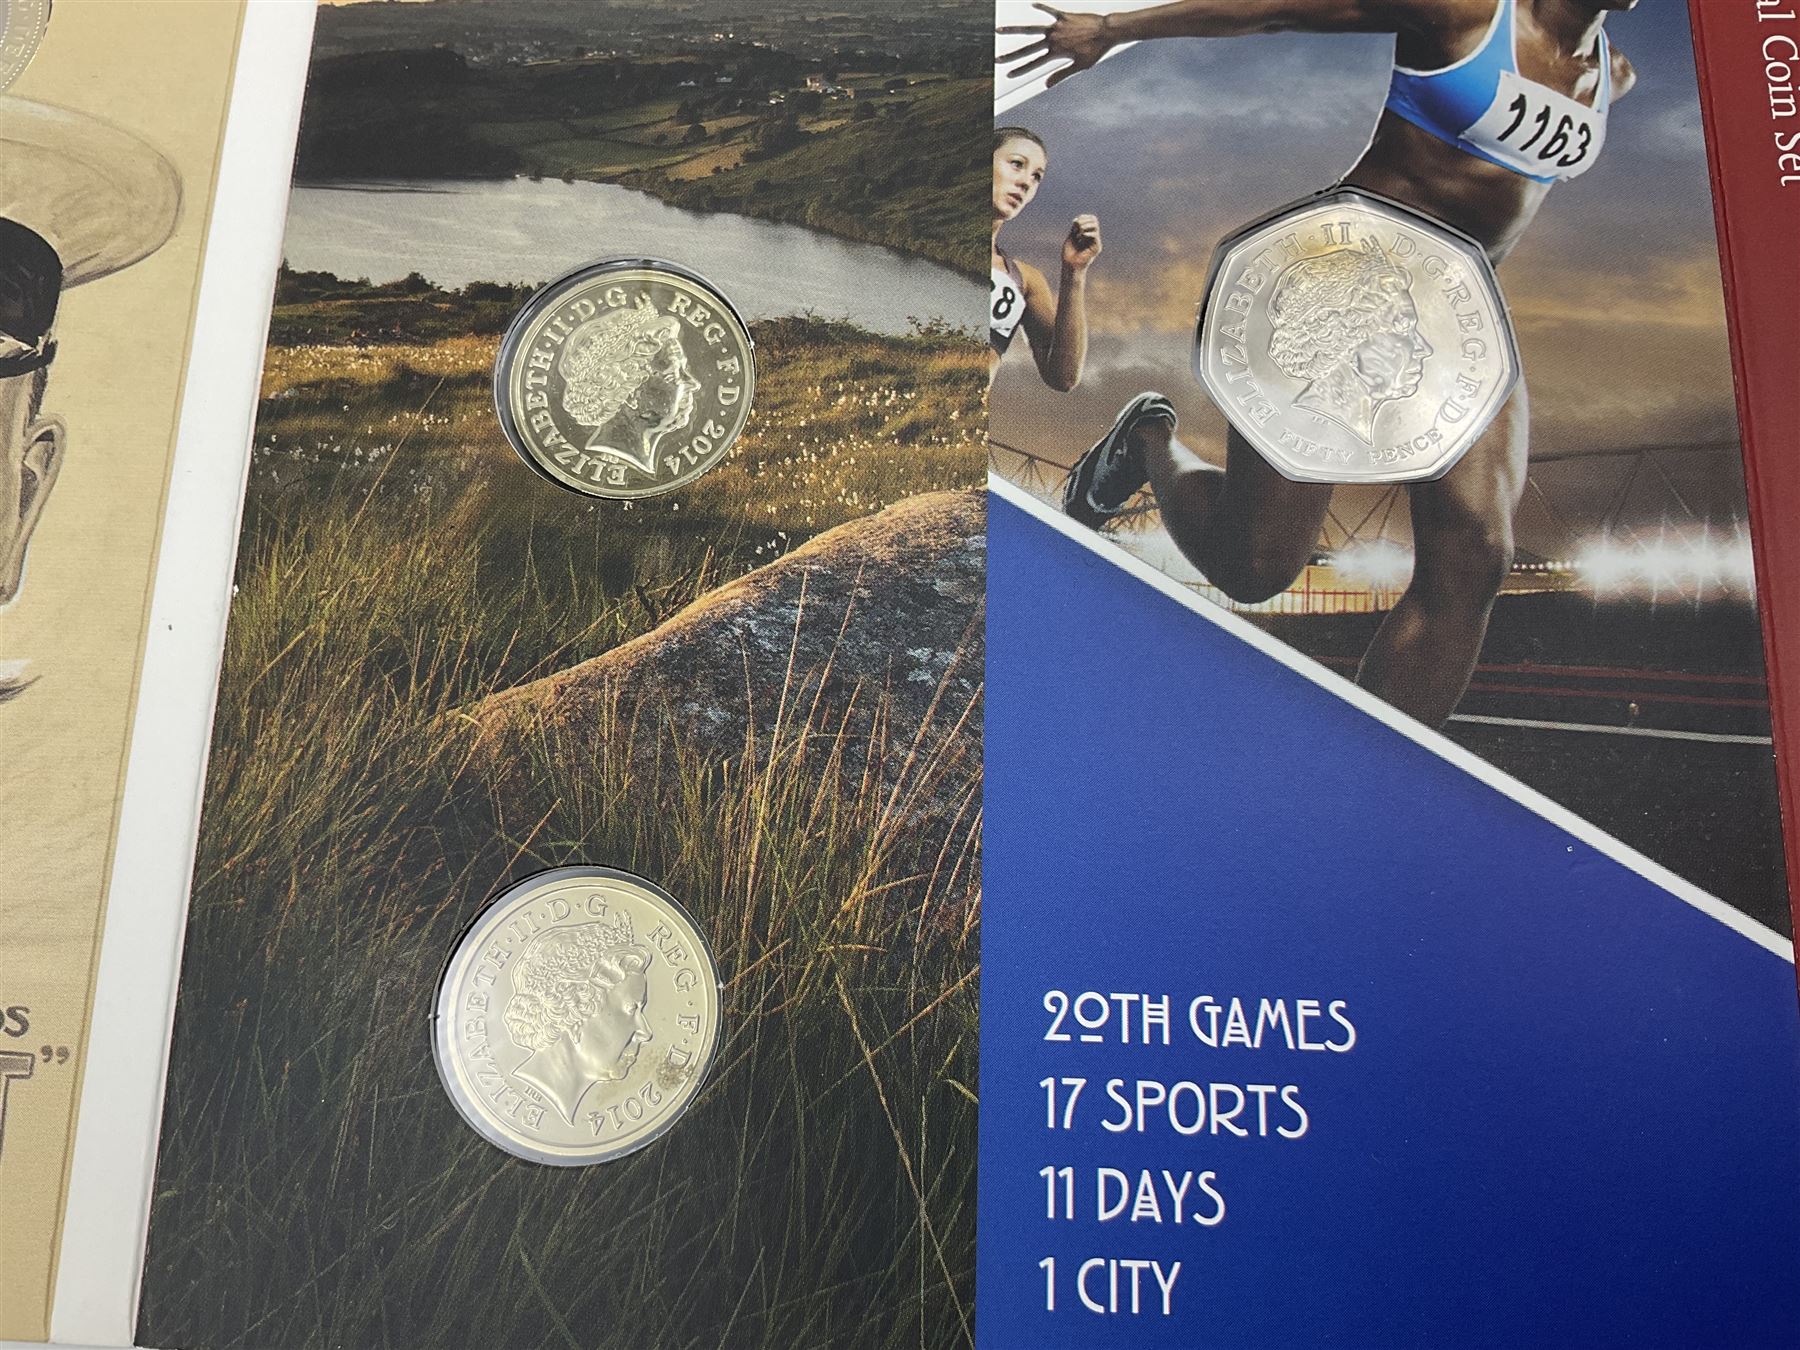 Two The Royal Mint United Kingdom Annual Coins Sets - Image 17 of 21